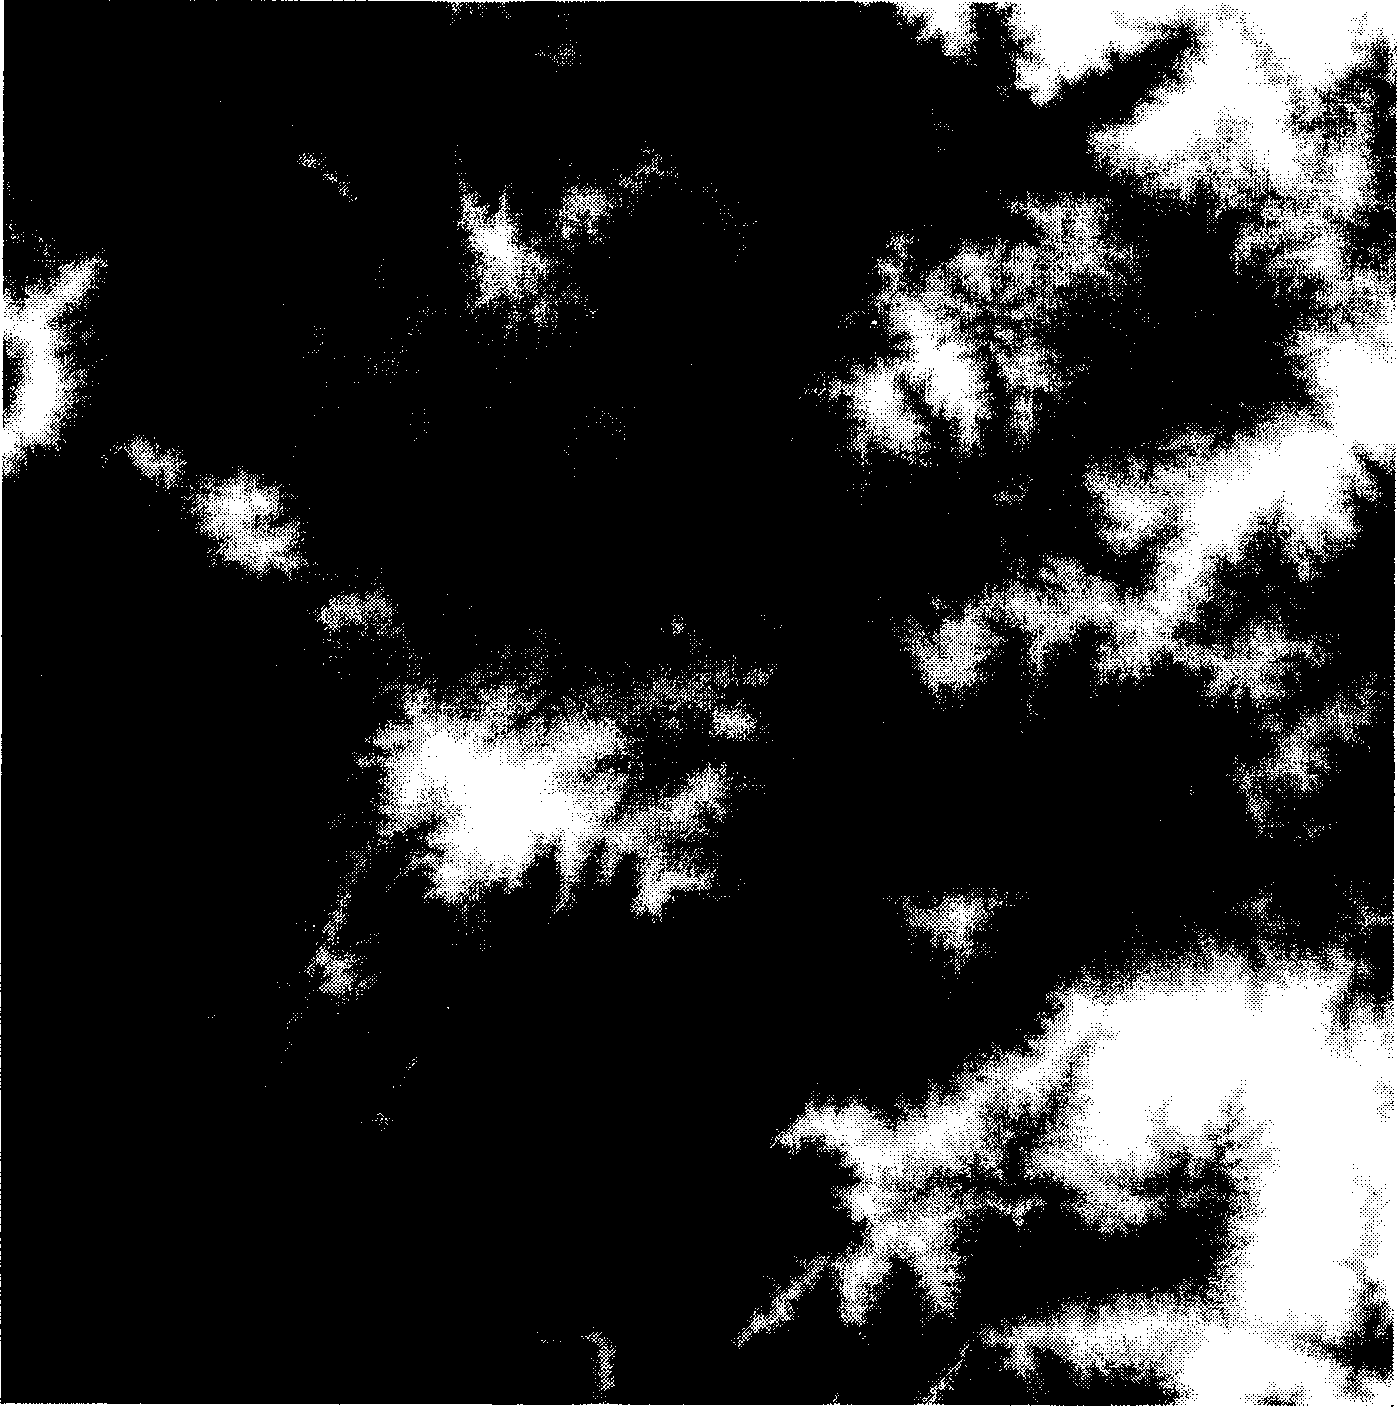 Computerized generation method for sunlight normalized distribution image on rough ground